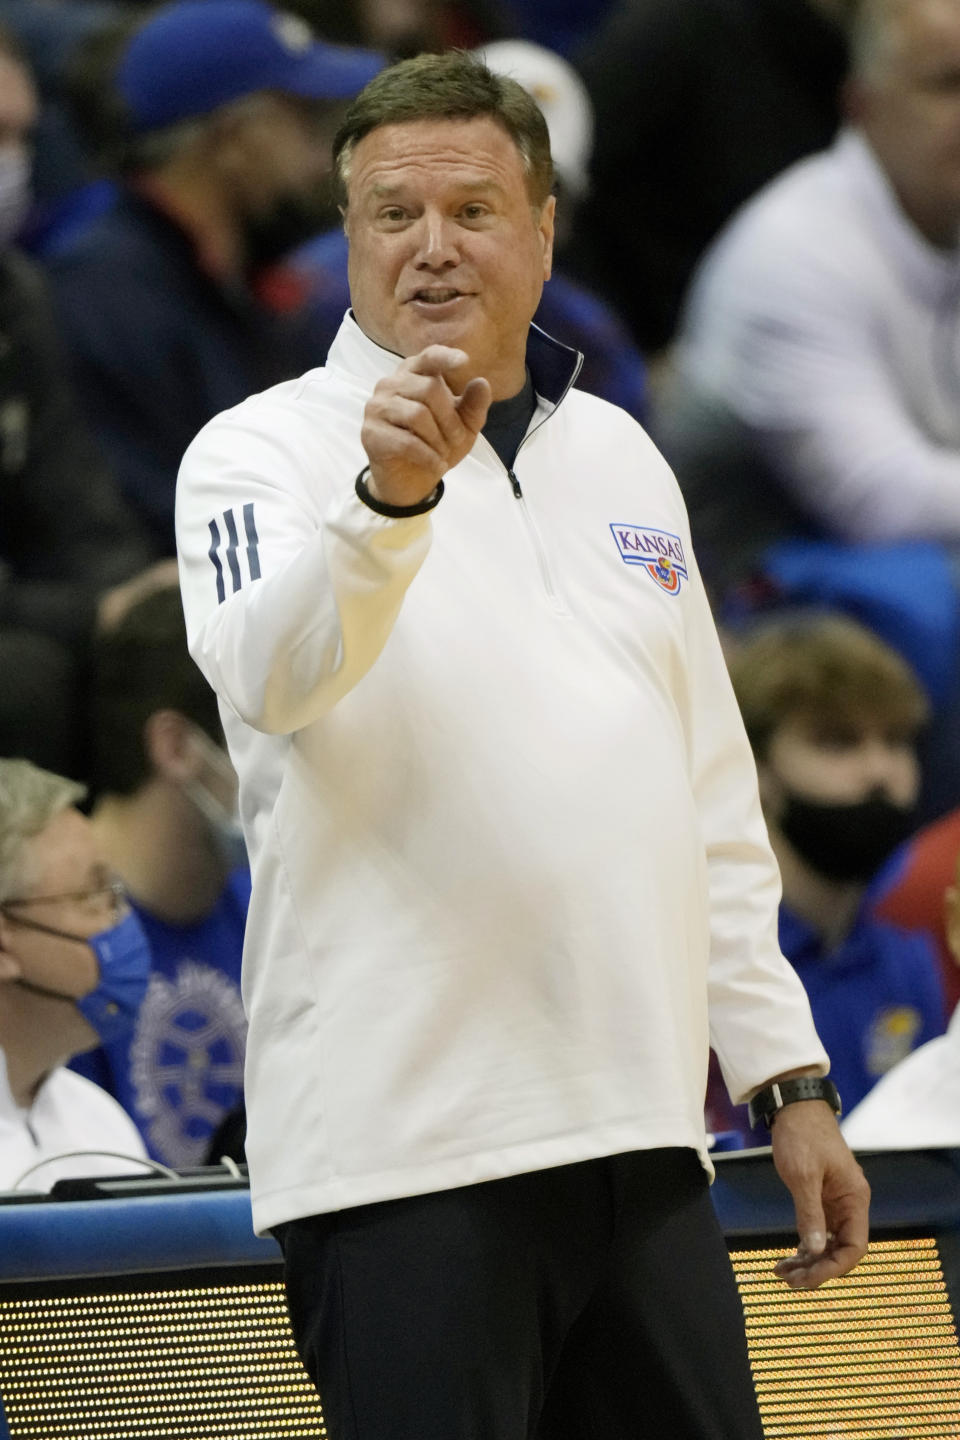 Kansas head coach Bill Self directs his team during the first half of an NCAA college basketball game against George Mason in Lawrence, Kan., Saturday, Jan. 1, 2022. (AP Photo/Orlin Wagner)